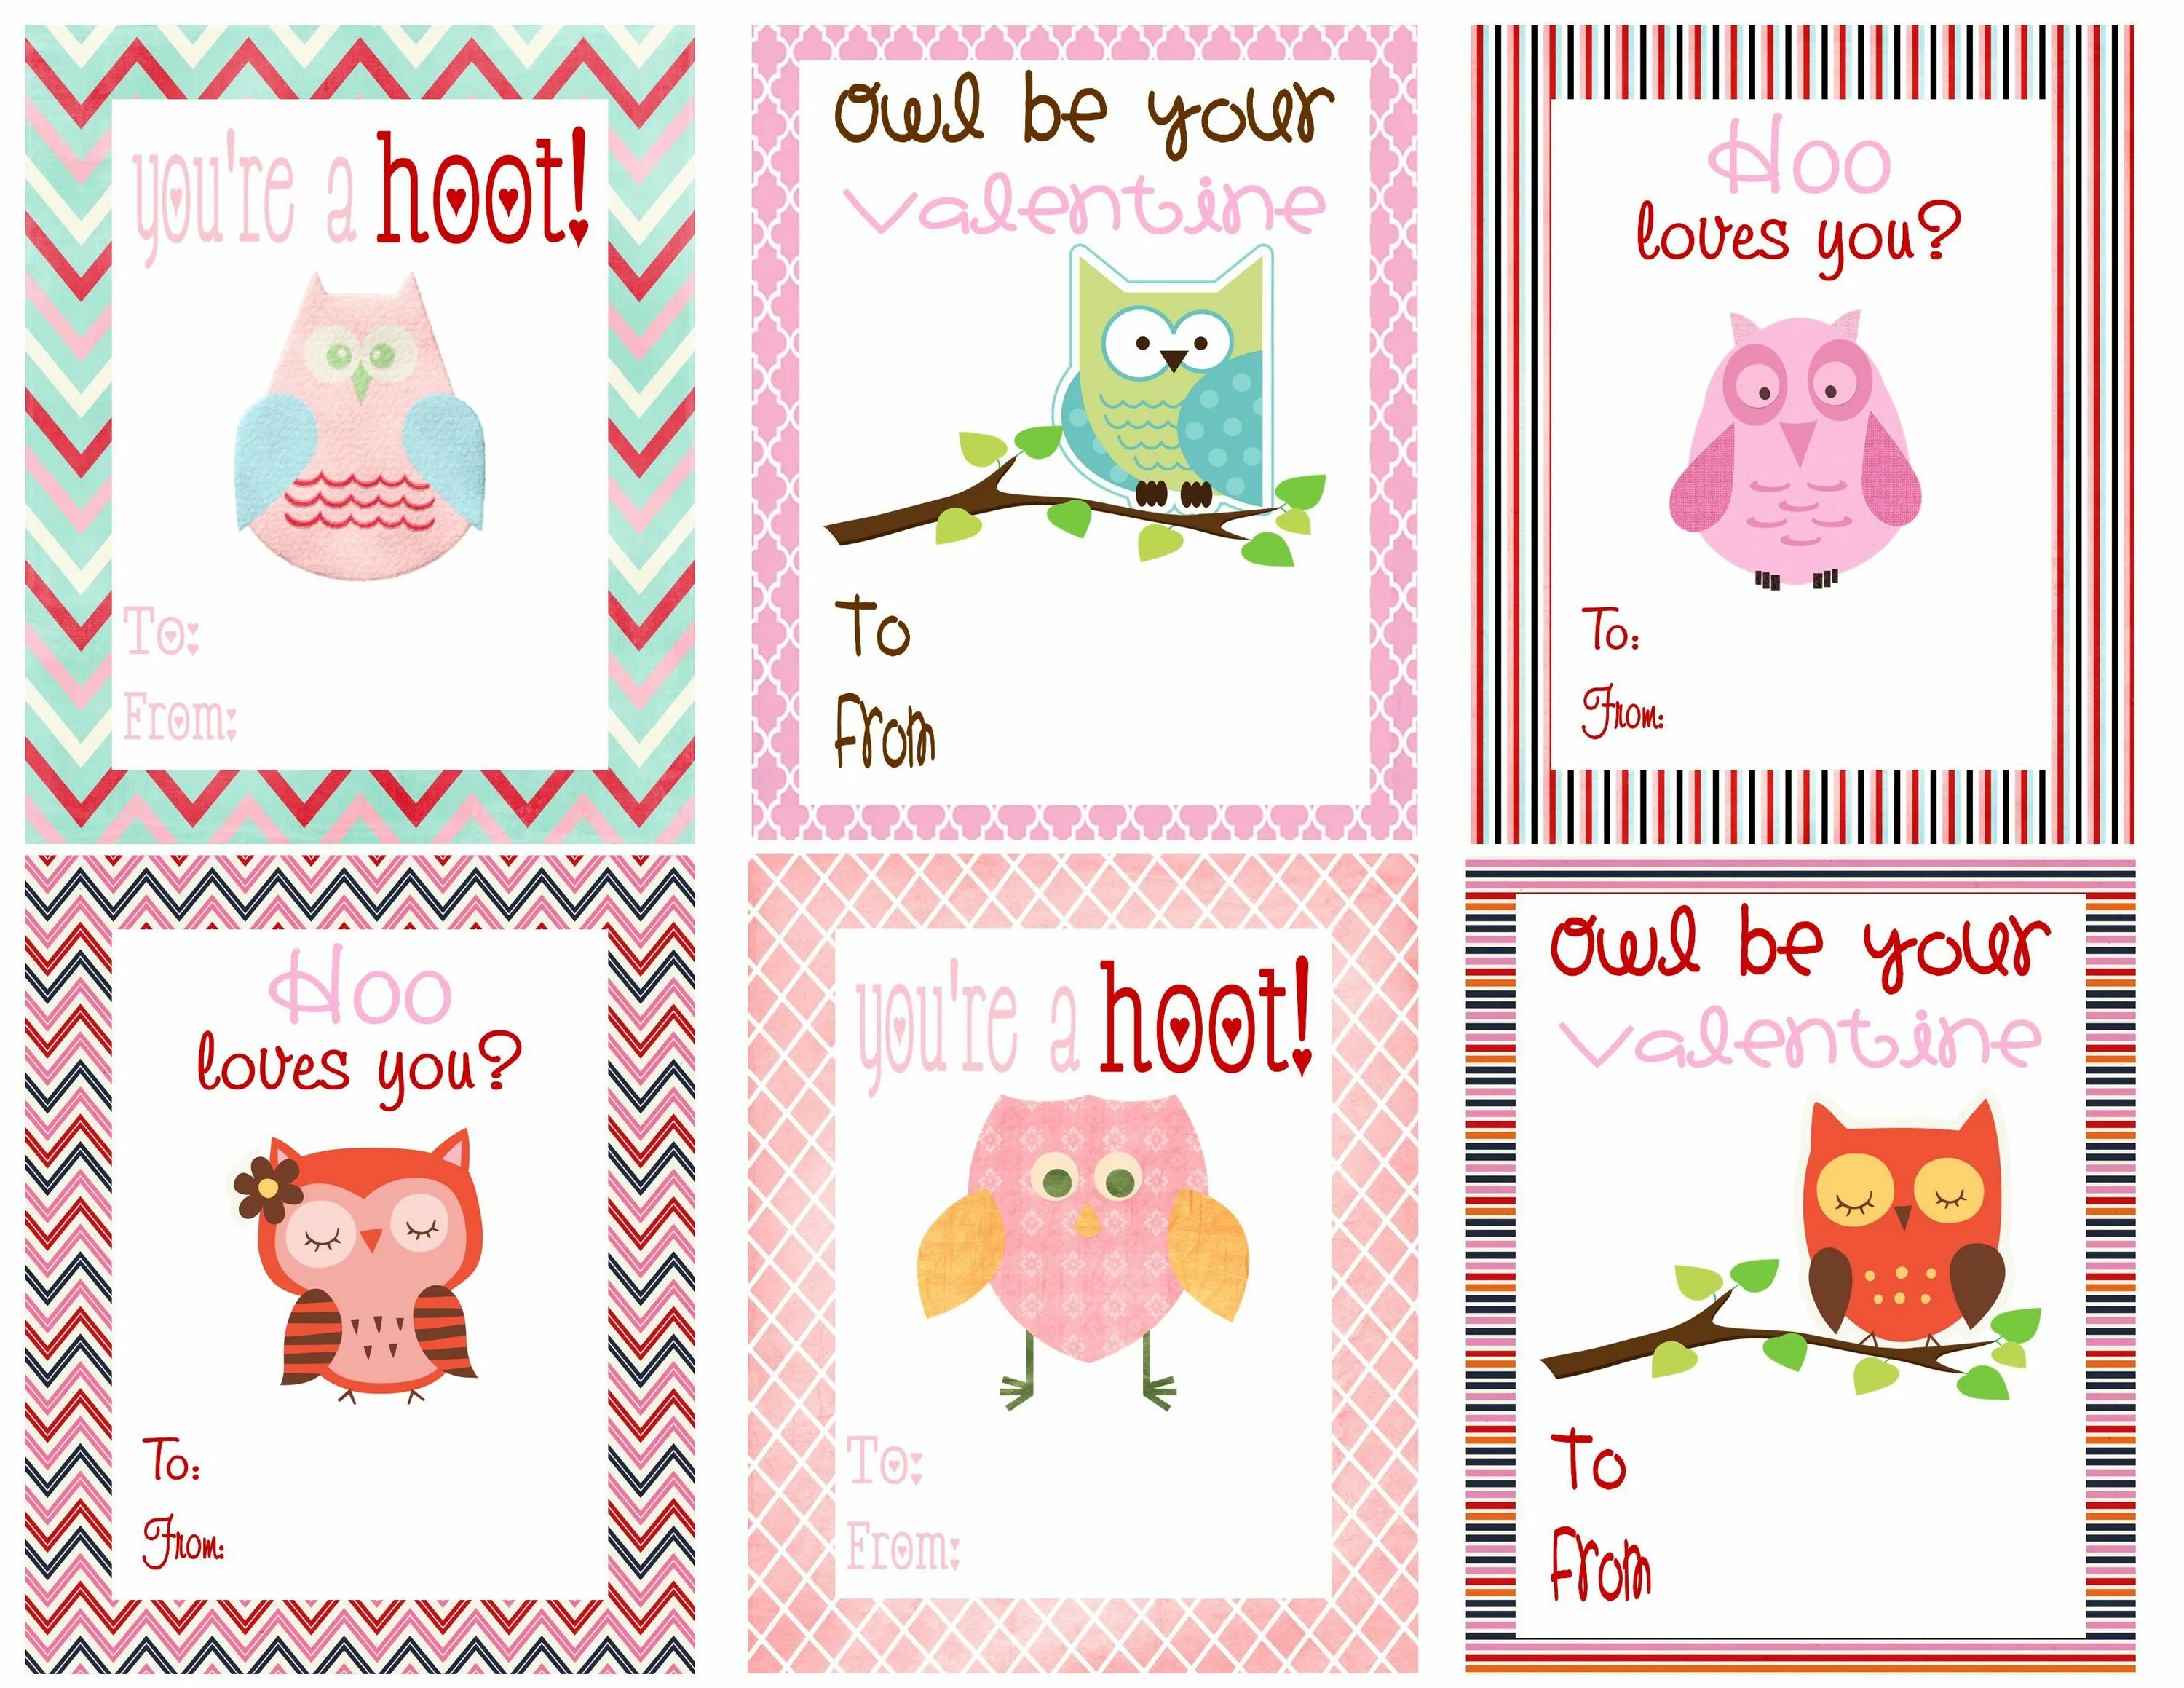 Printable cards. Valentine Cards for Kids. Valentine Cards for Kids Printable. День Святого Валентина Cards for Kids. Valentine's Day Cards Printable.